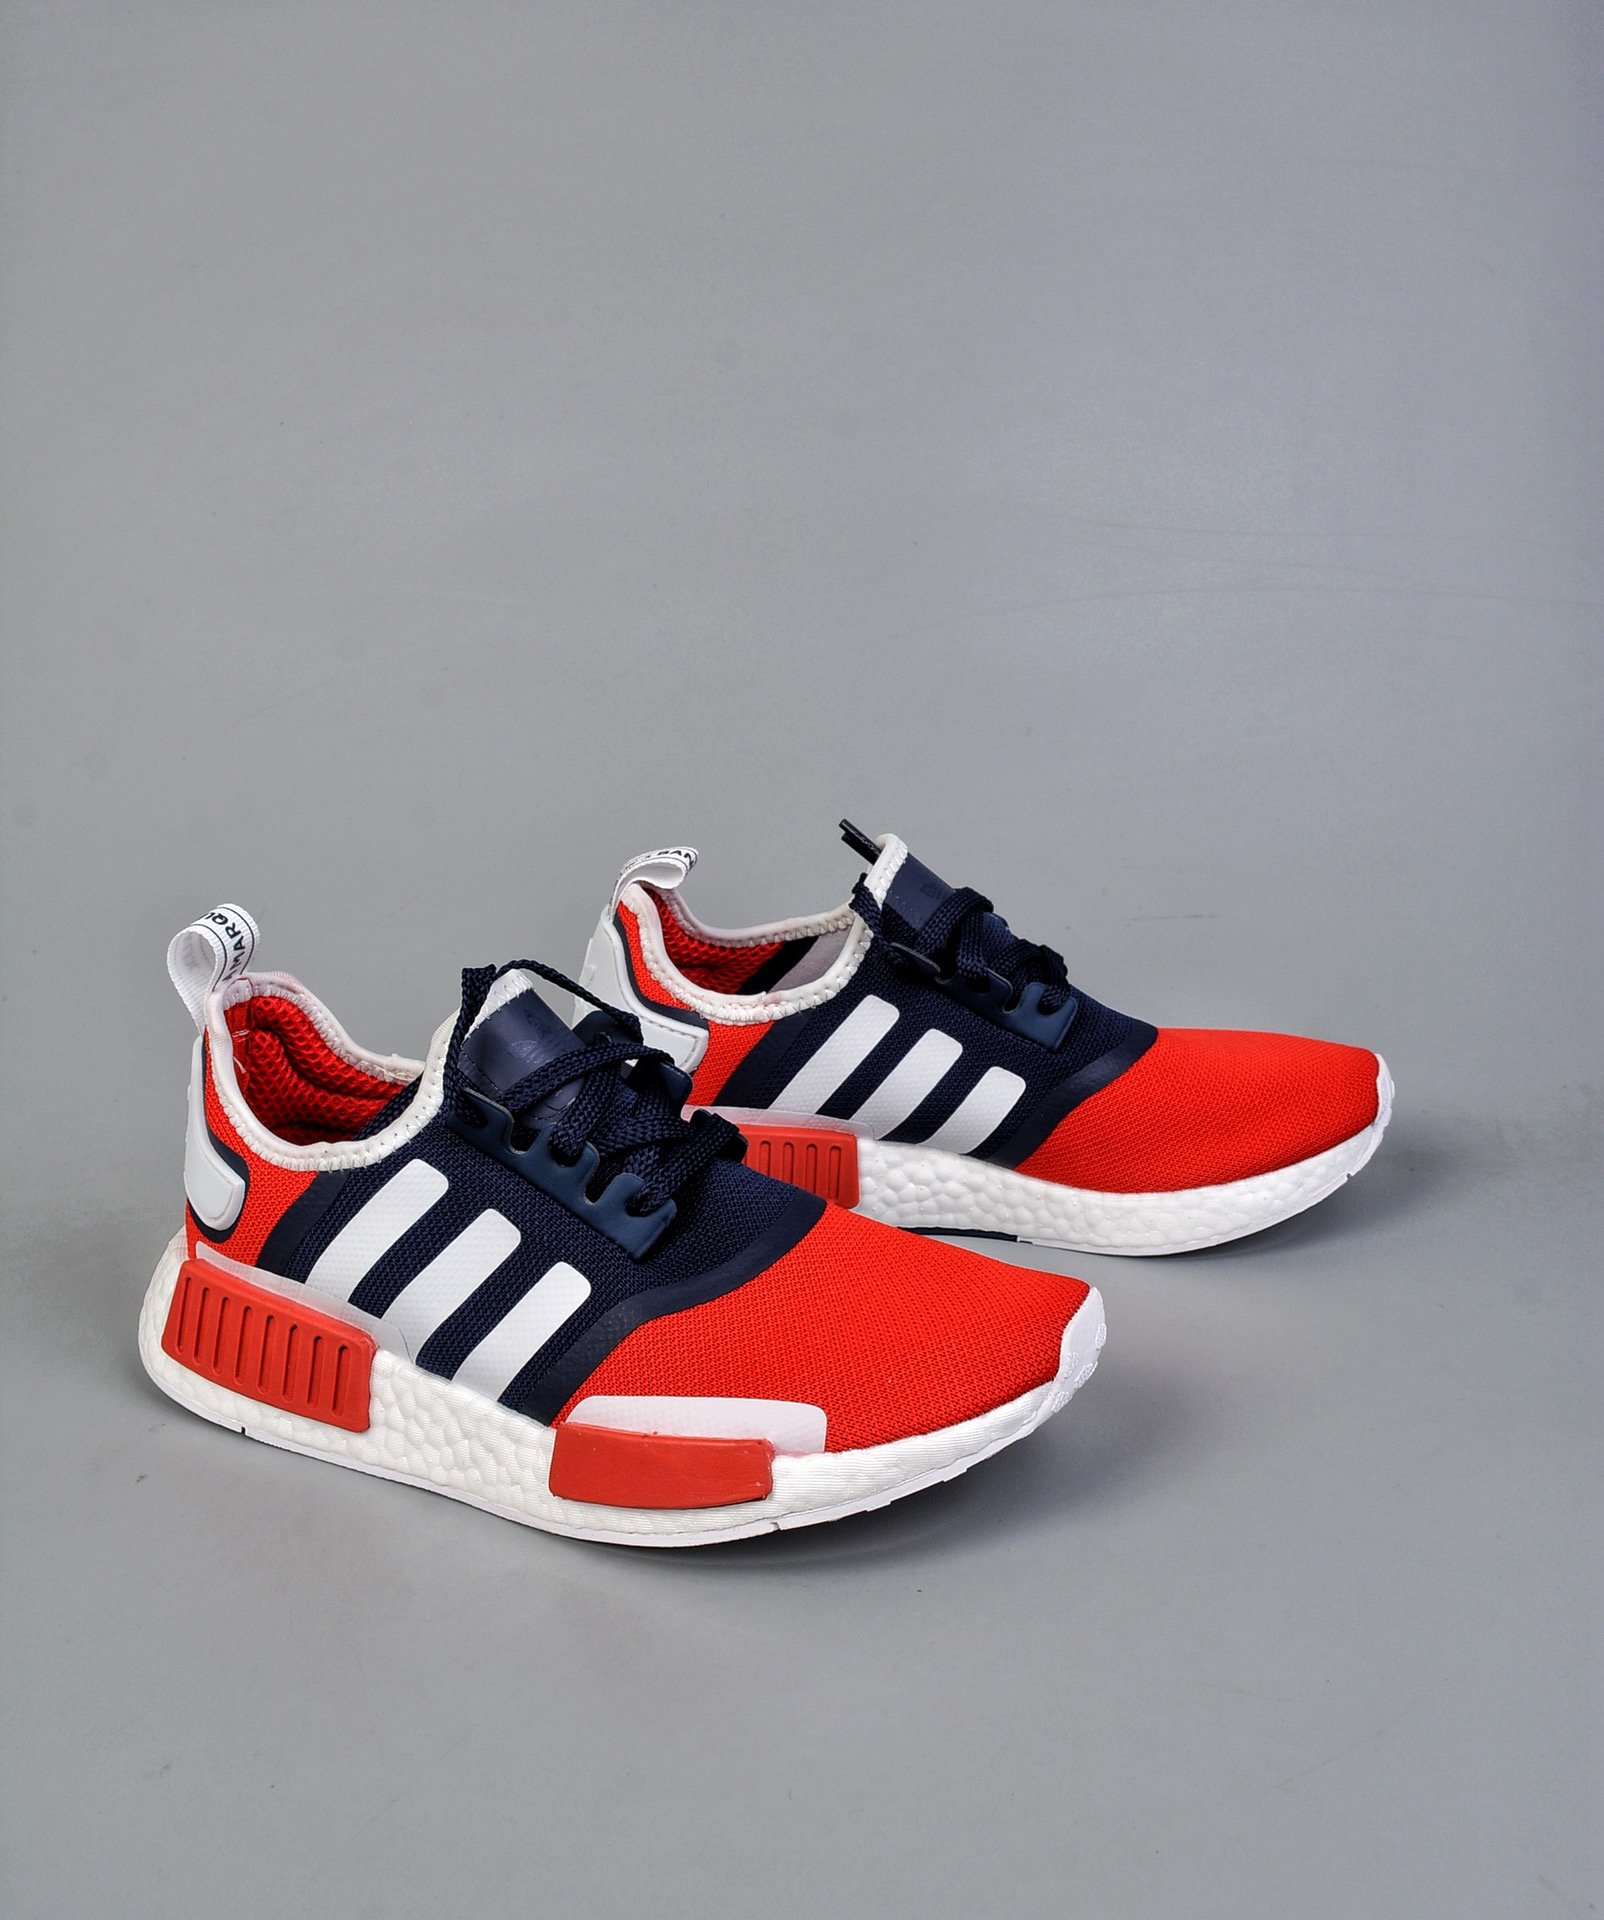 adidas nmd r1 red white and blue